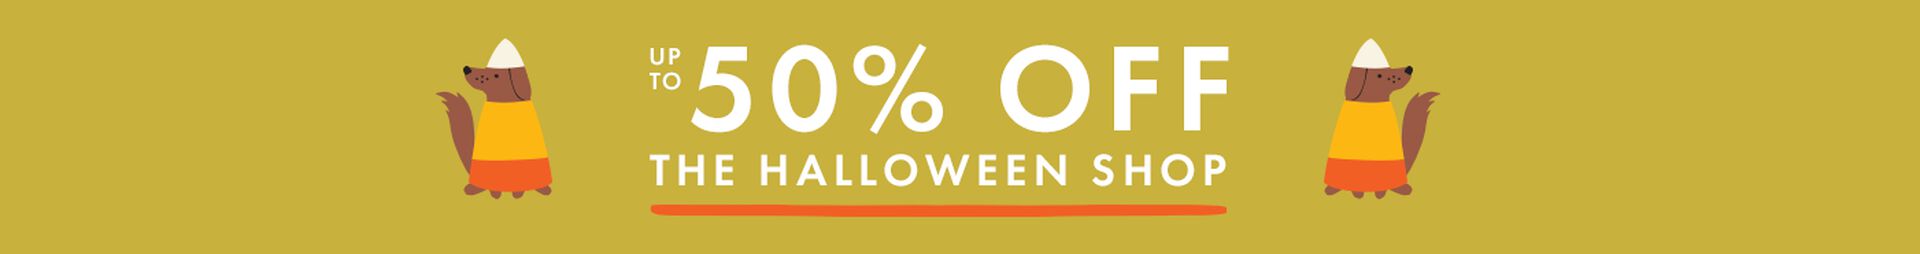 Up to 50% off Halloween. shop now.